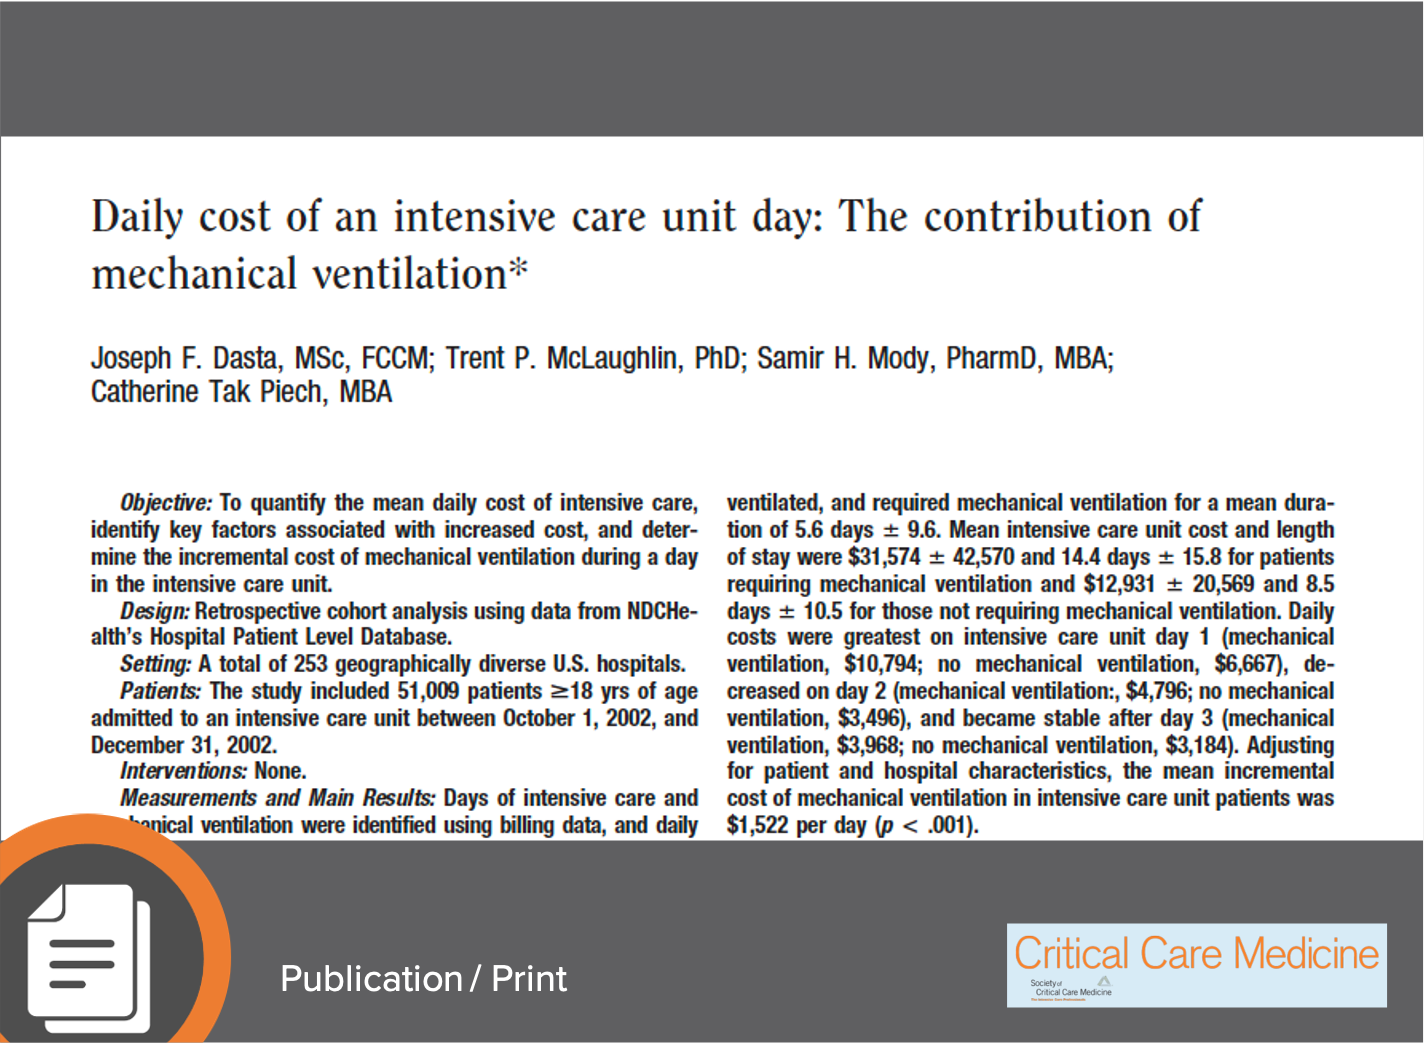 Daily Cost of an Intensive Care Unit Day: The Contribution of Mechanical Ventilation